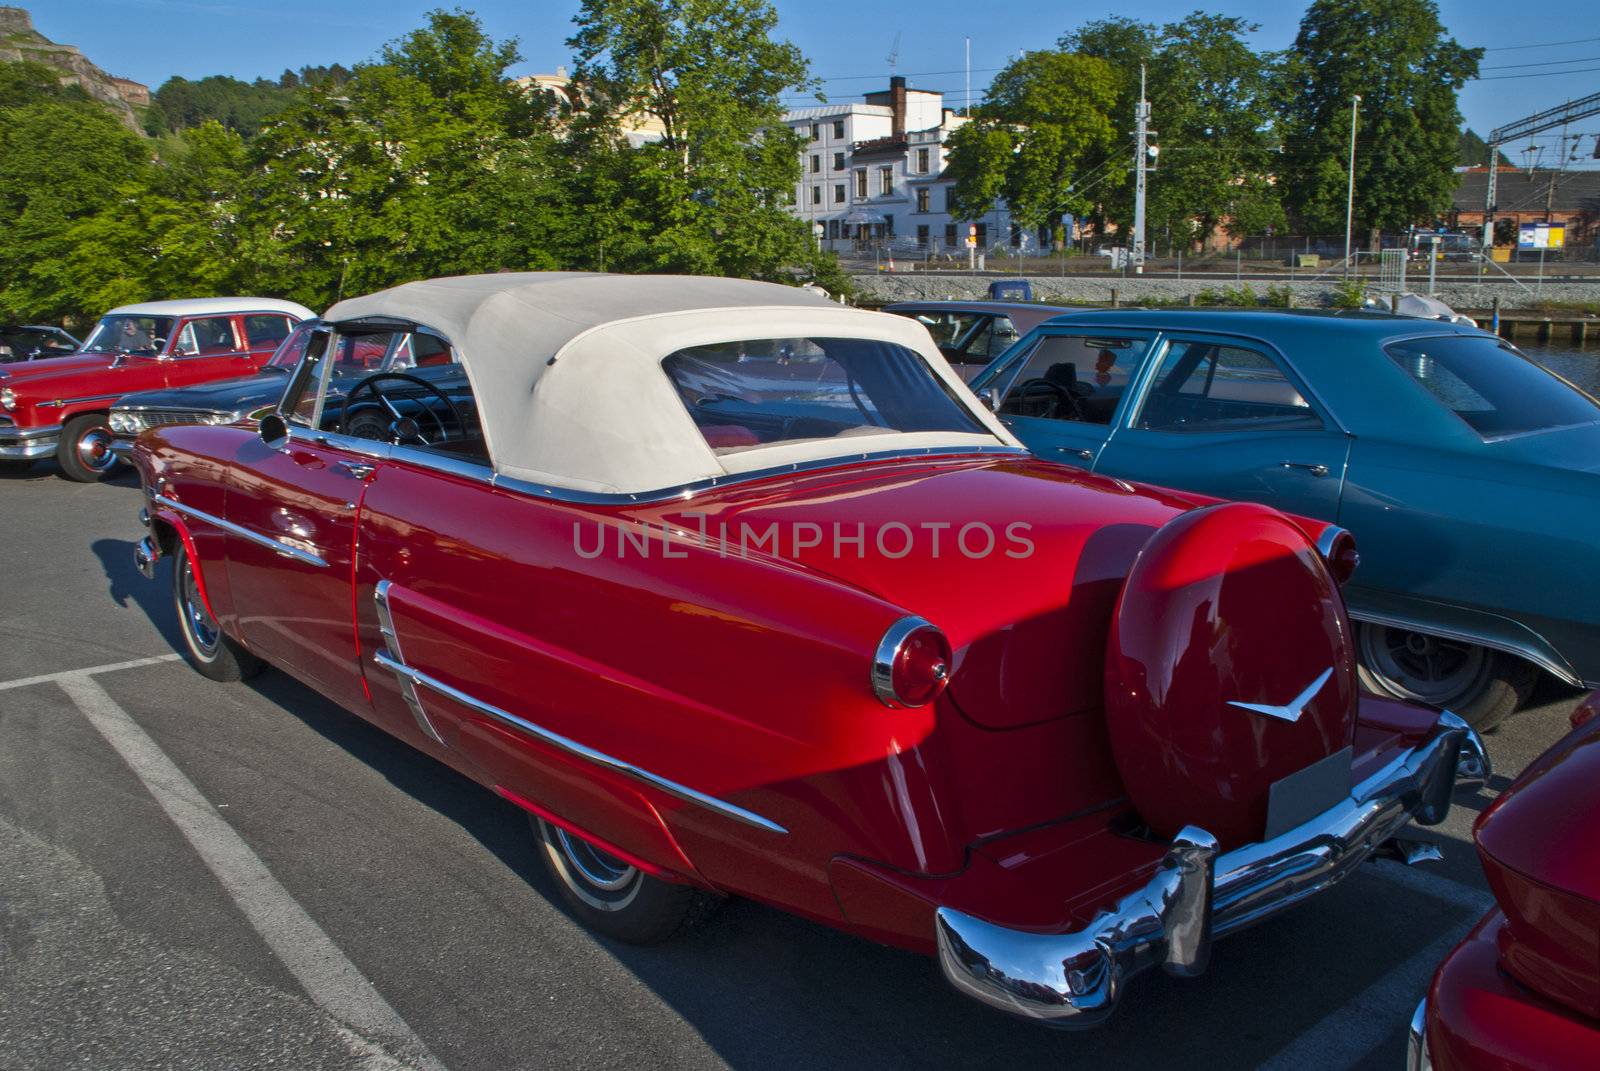 am car meeting in Halden City (1953 Ford Crown Victoria) by steirus